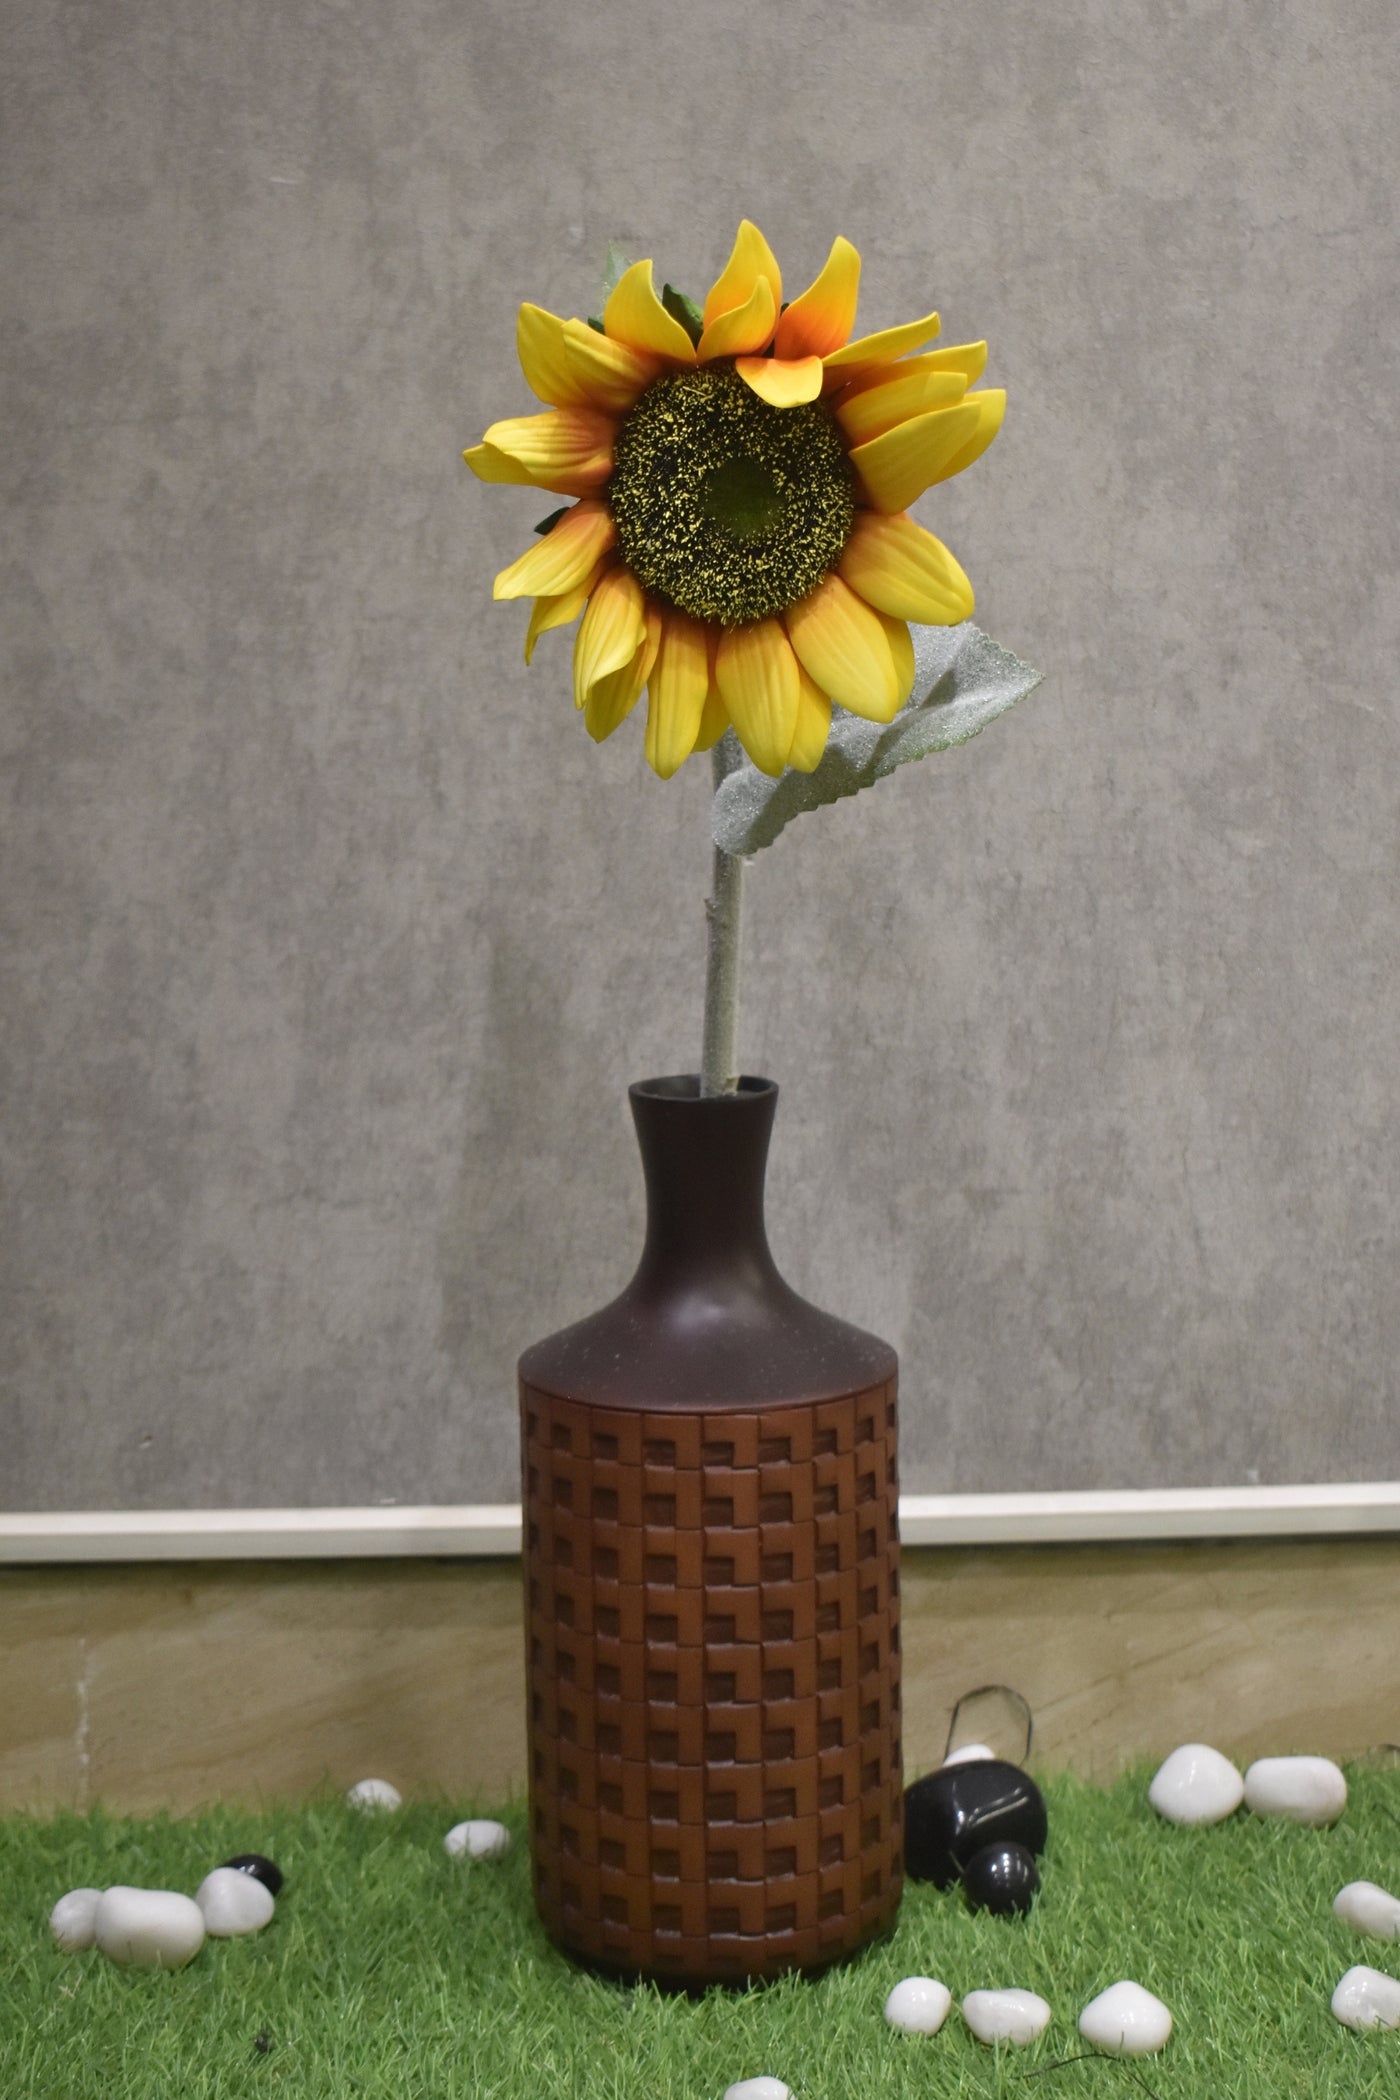 Artificial Sunflowers for your home or office decor